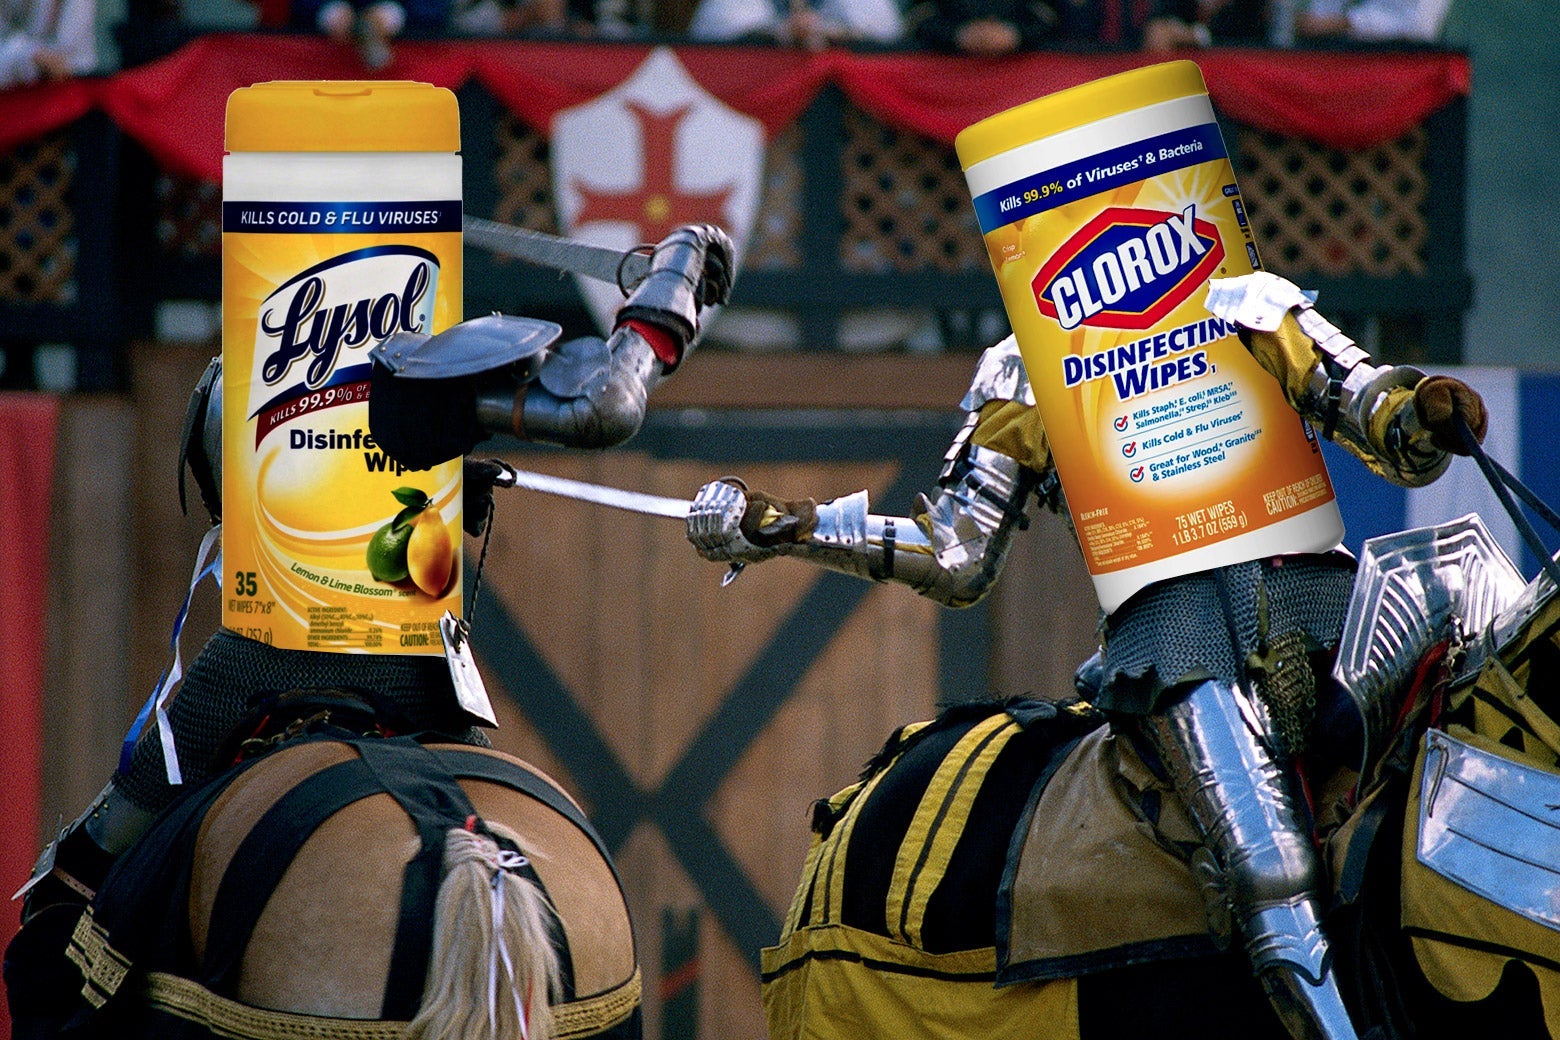 A Clorox canister and a Lysol canister on horses in a jousting match.